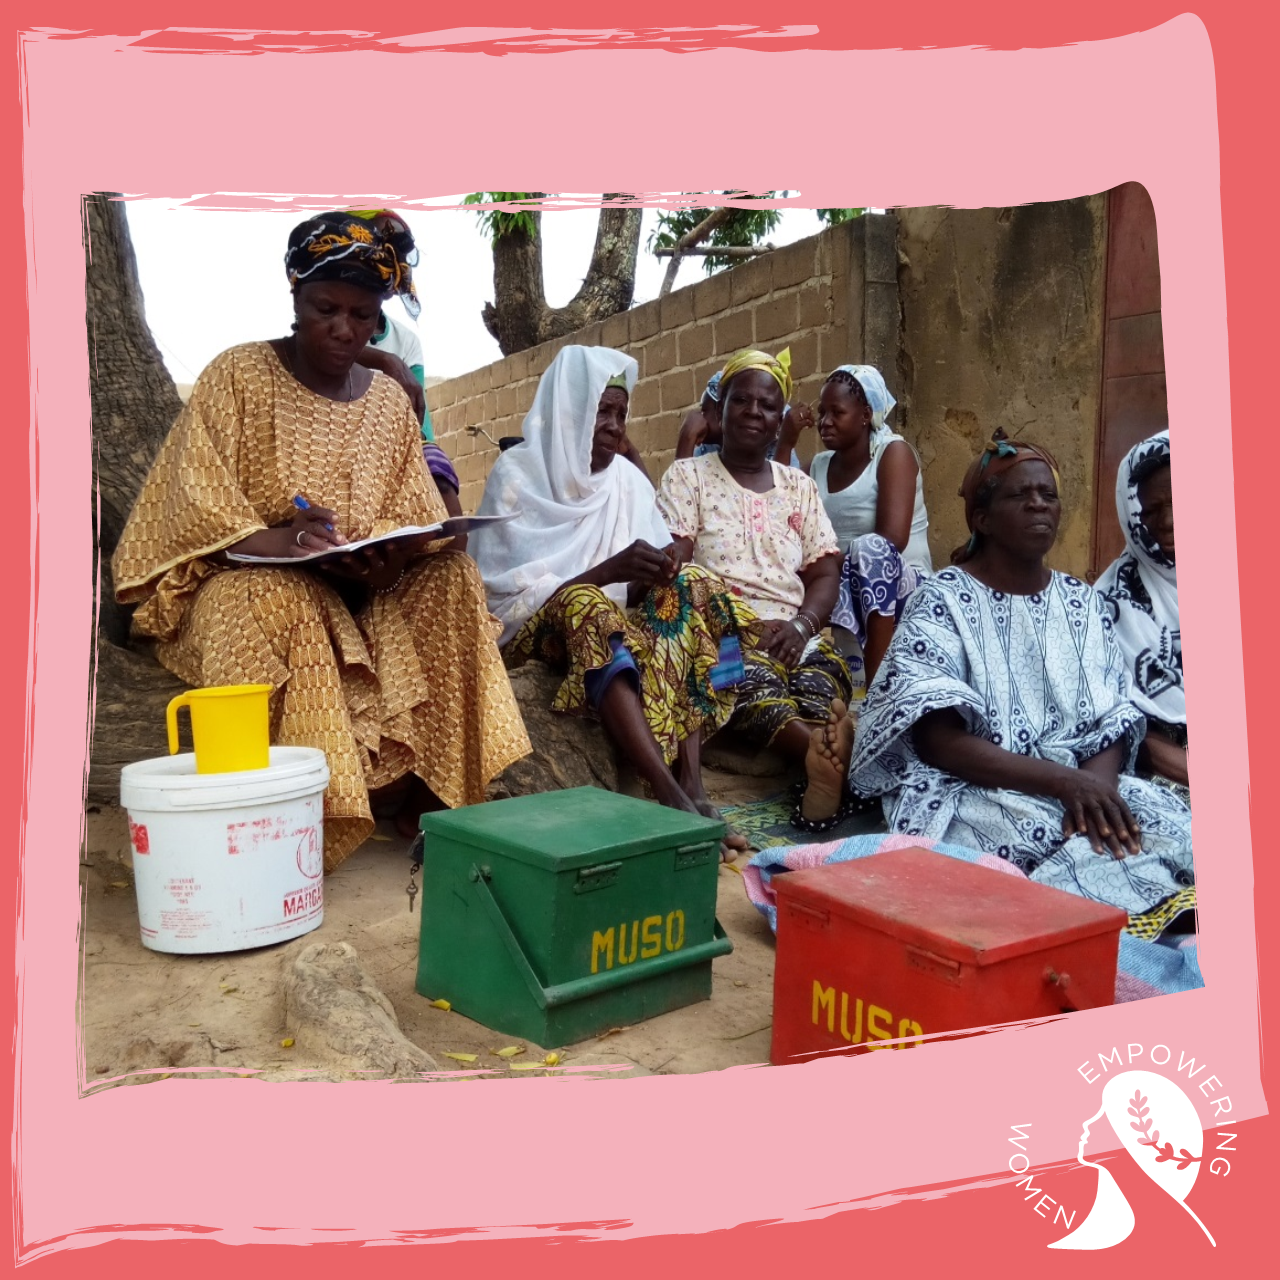 Since 2009, the Foundation has supported the social microfinance project of the NGO Entrepreneurs du Monde. This project provides rural women with adapted loans and training on socio-economic issues. More than 24,000 women have benefited from this project. 